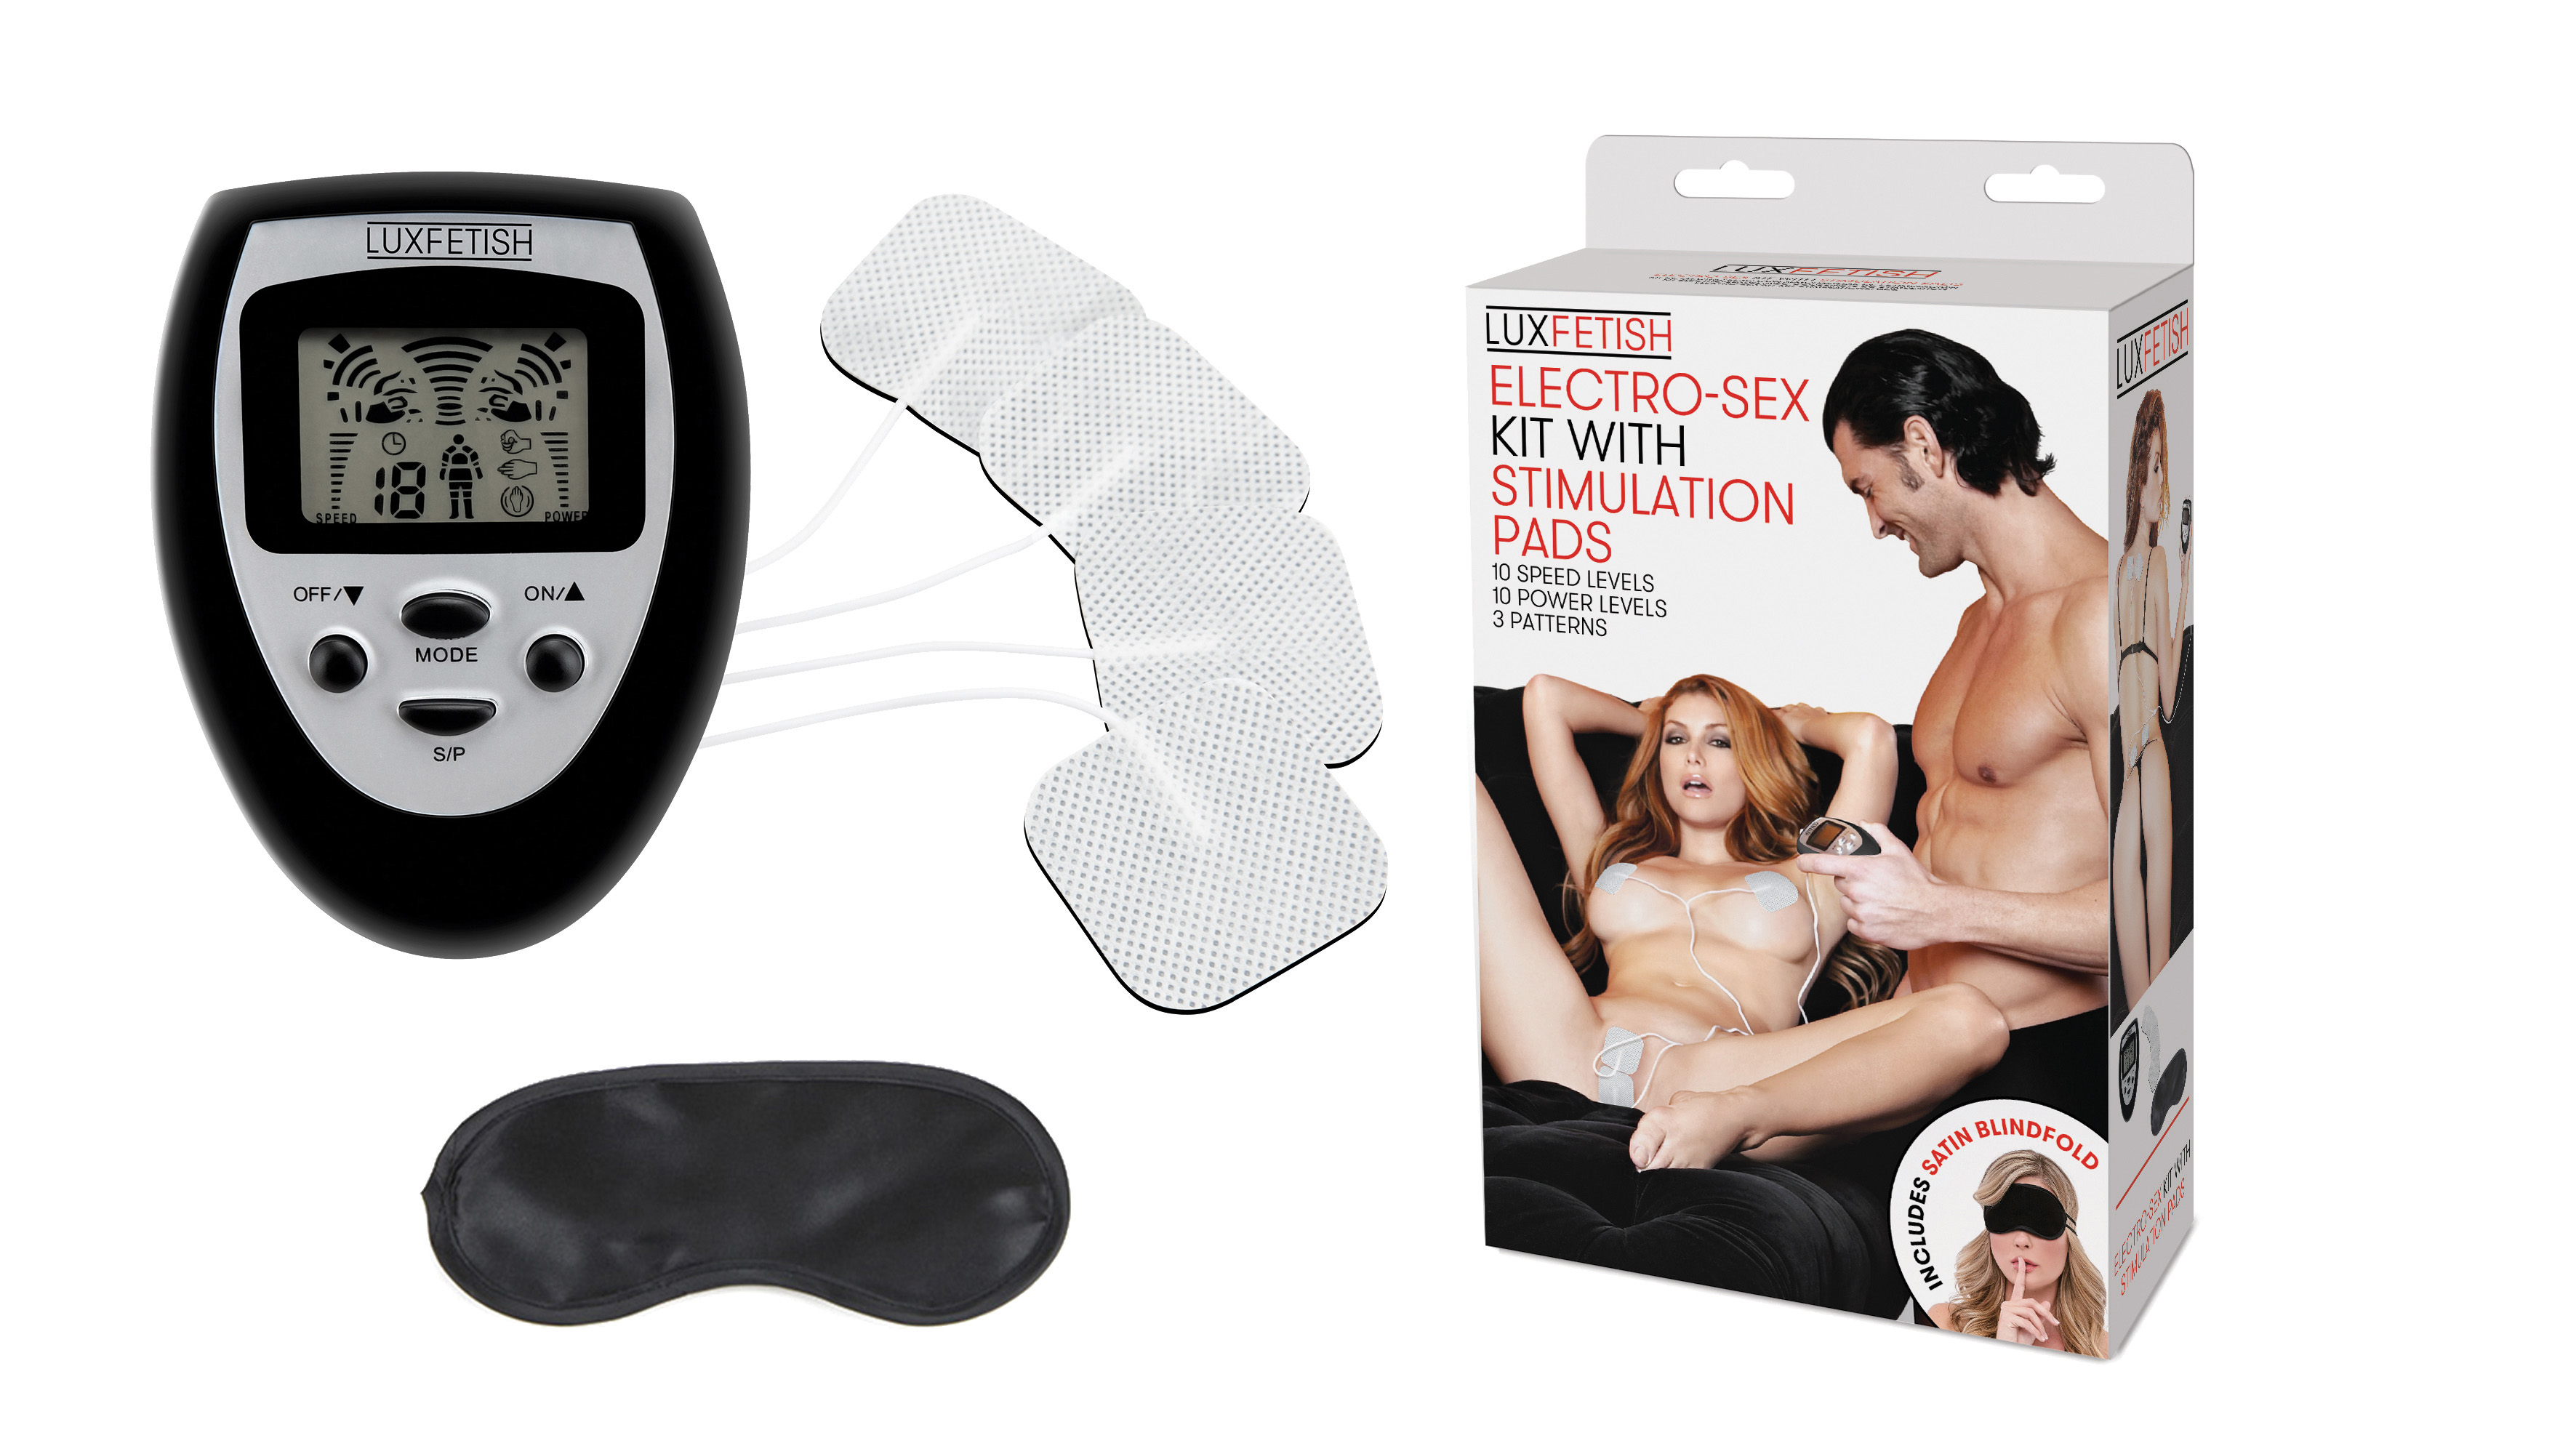 LUX FETISH Electro-Sex Kit With Stimulation Pads